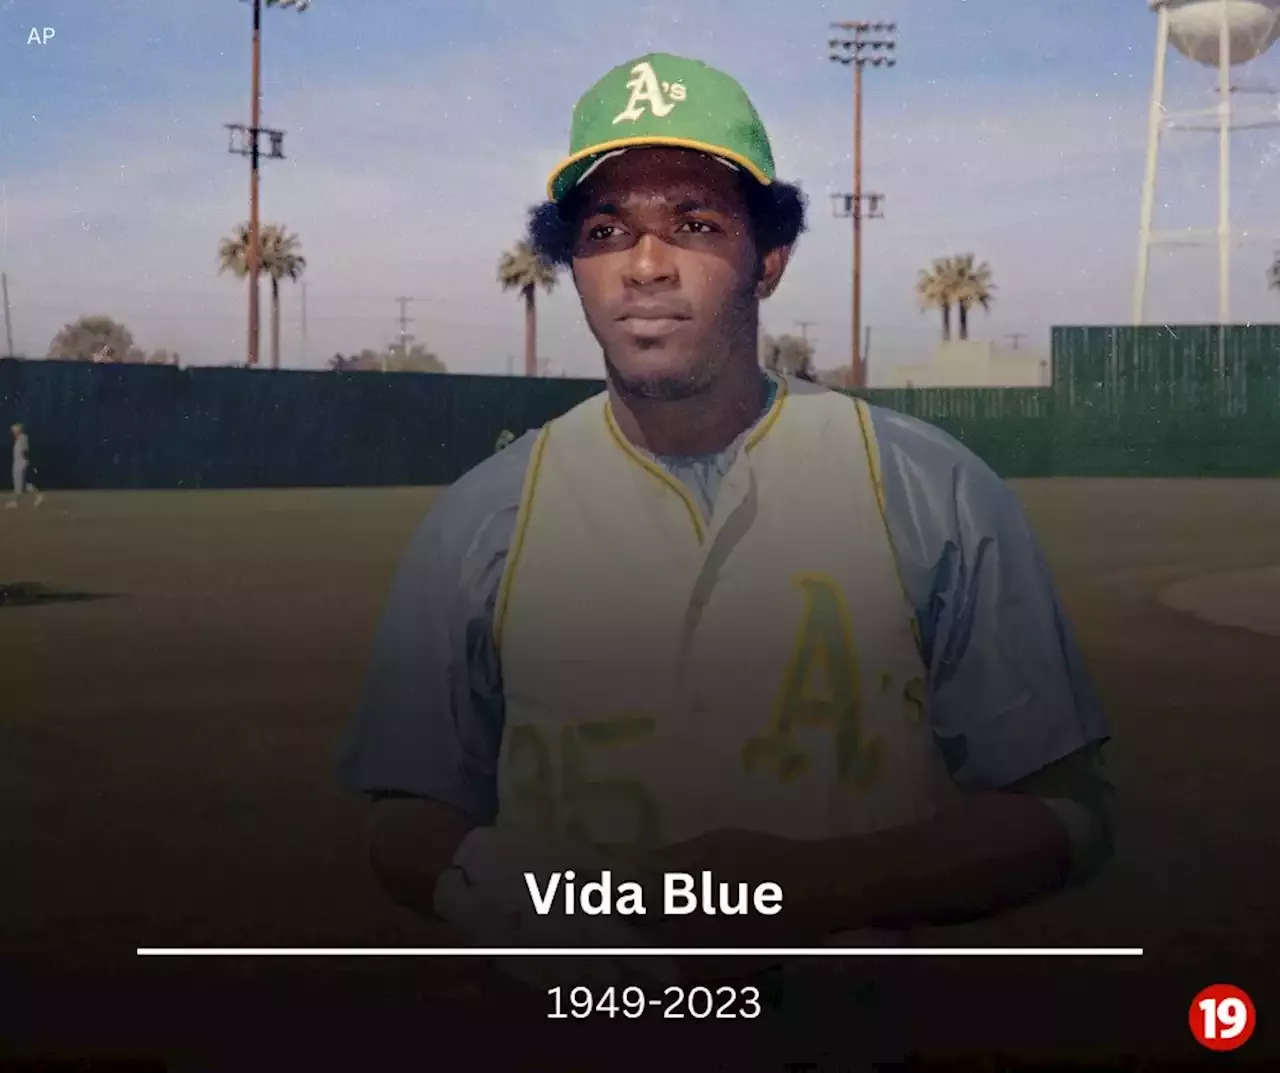 Vida Blue, who led Oakland to 3 World Series titles, dies at 73